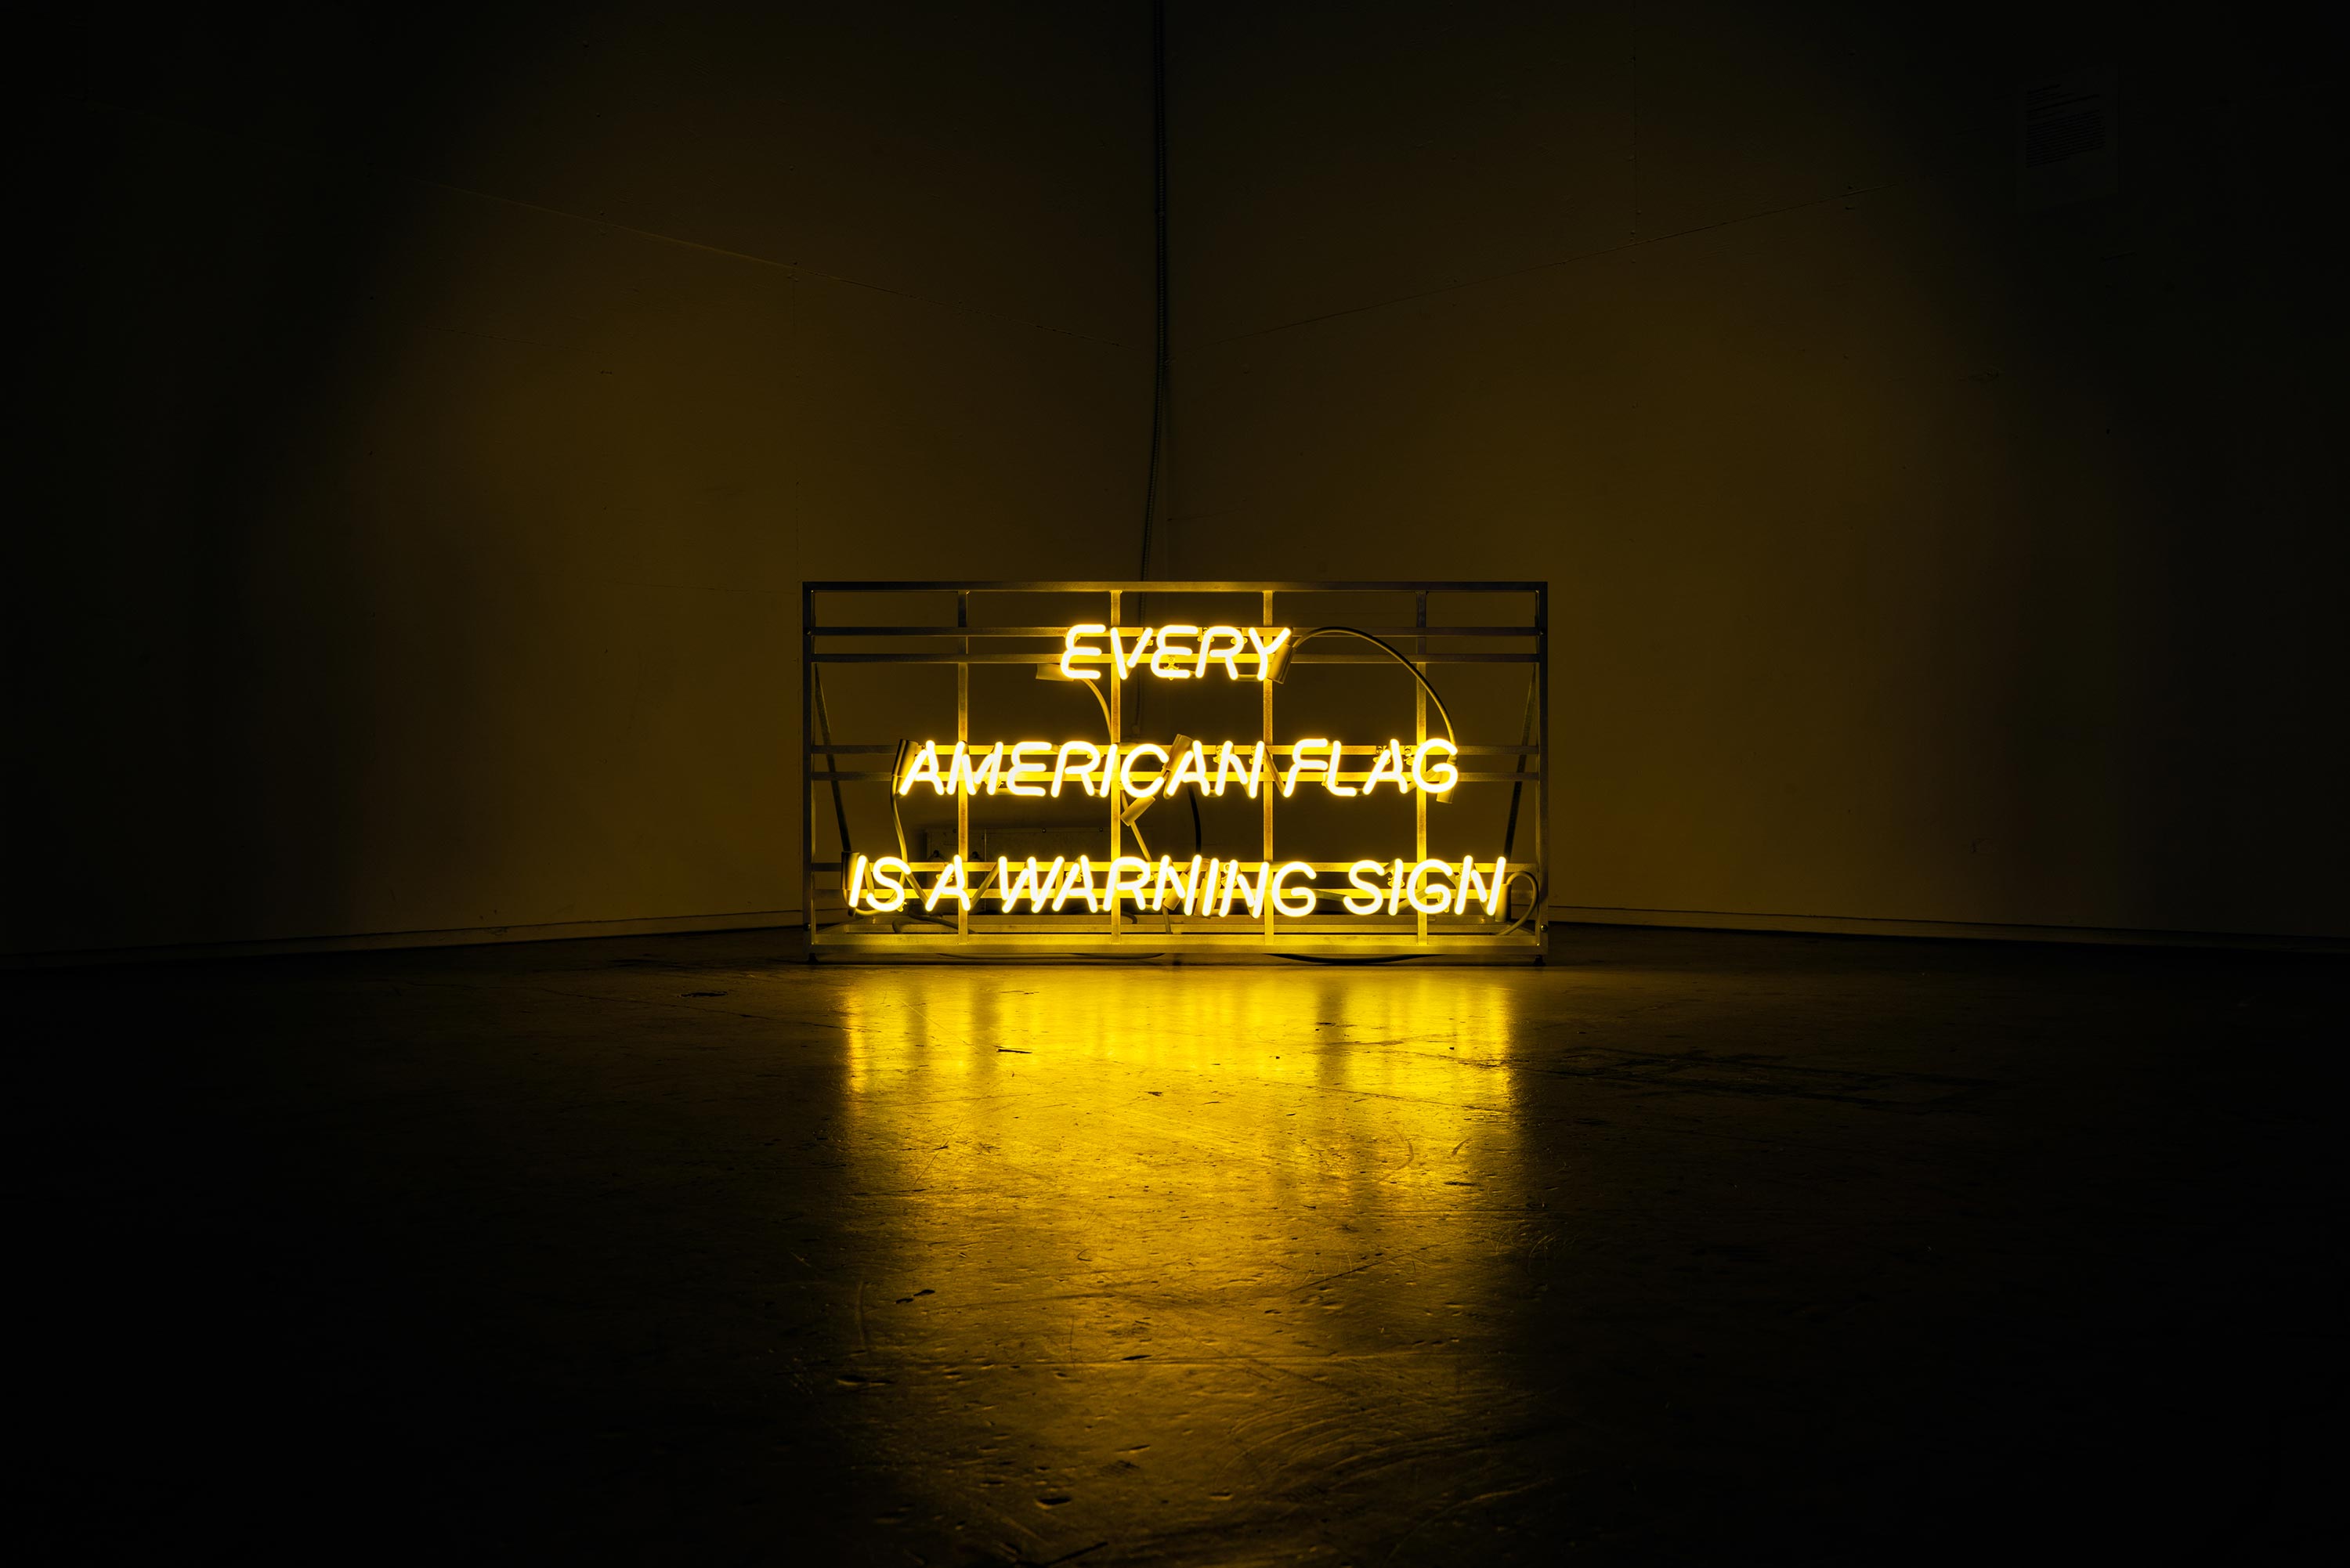 Demian DinéYazhi´ (Diné, born 1983), 'my ancestors will not let me forget this', 2019, Neon, aluminum, 21 x 42 x 20 in., Museum Purchase: Eiteljorg Fellowship